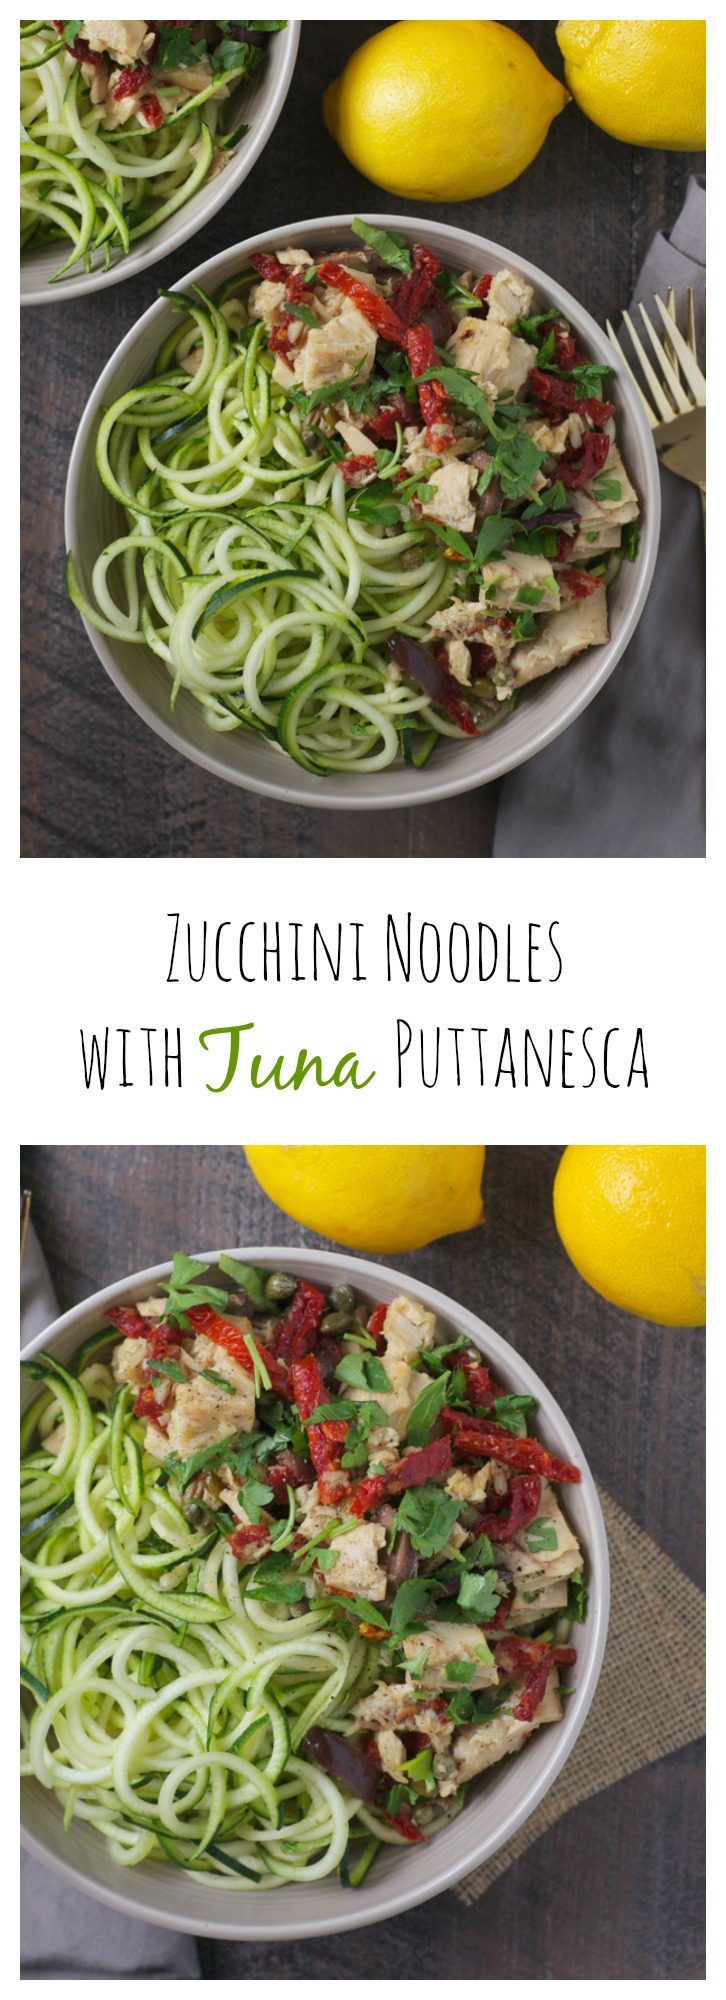 Looking for a 10-minute, protein-packed, gluten-free dinner? Look no further! Zucchini noodles with tuna puttanesca is your new favorite weeknight meal! #OnlyAlbacore #CG #BumbleBeeTuna